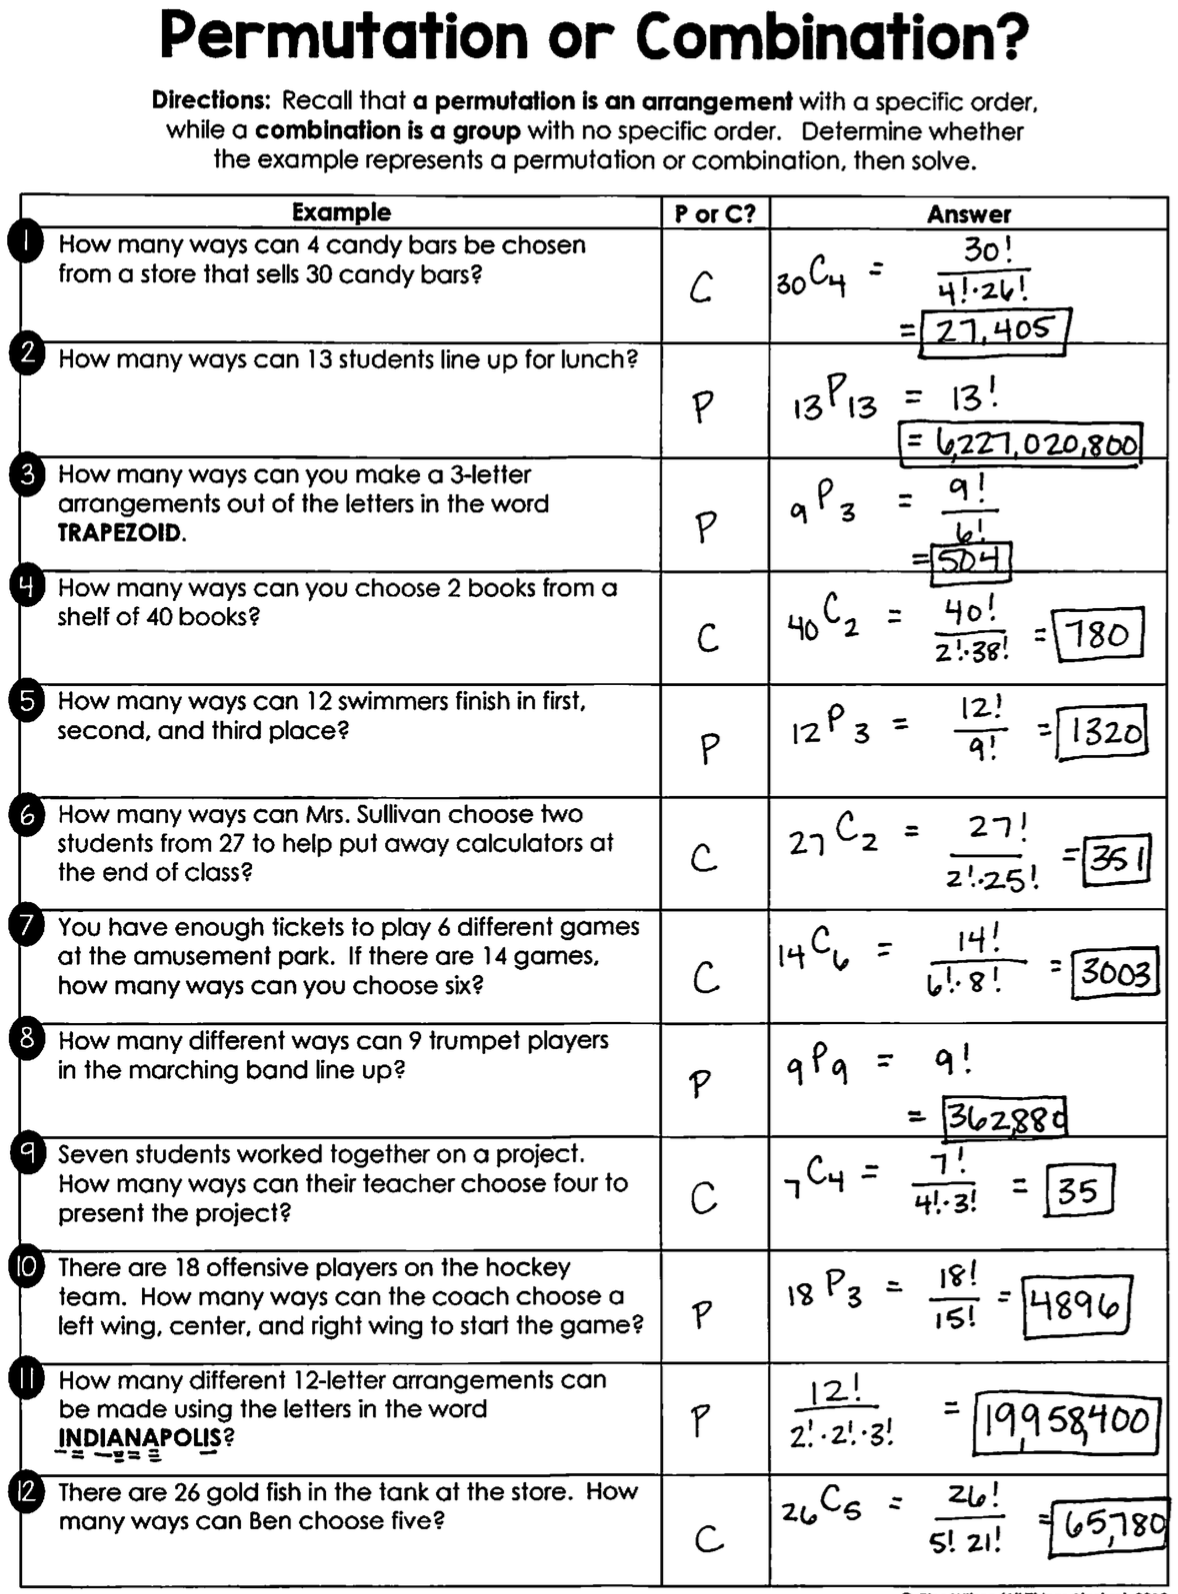 Permutations And Combinations Worksheet Answers - Worksheet List Intended For Permutations And Combinations Worksheet Answers